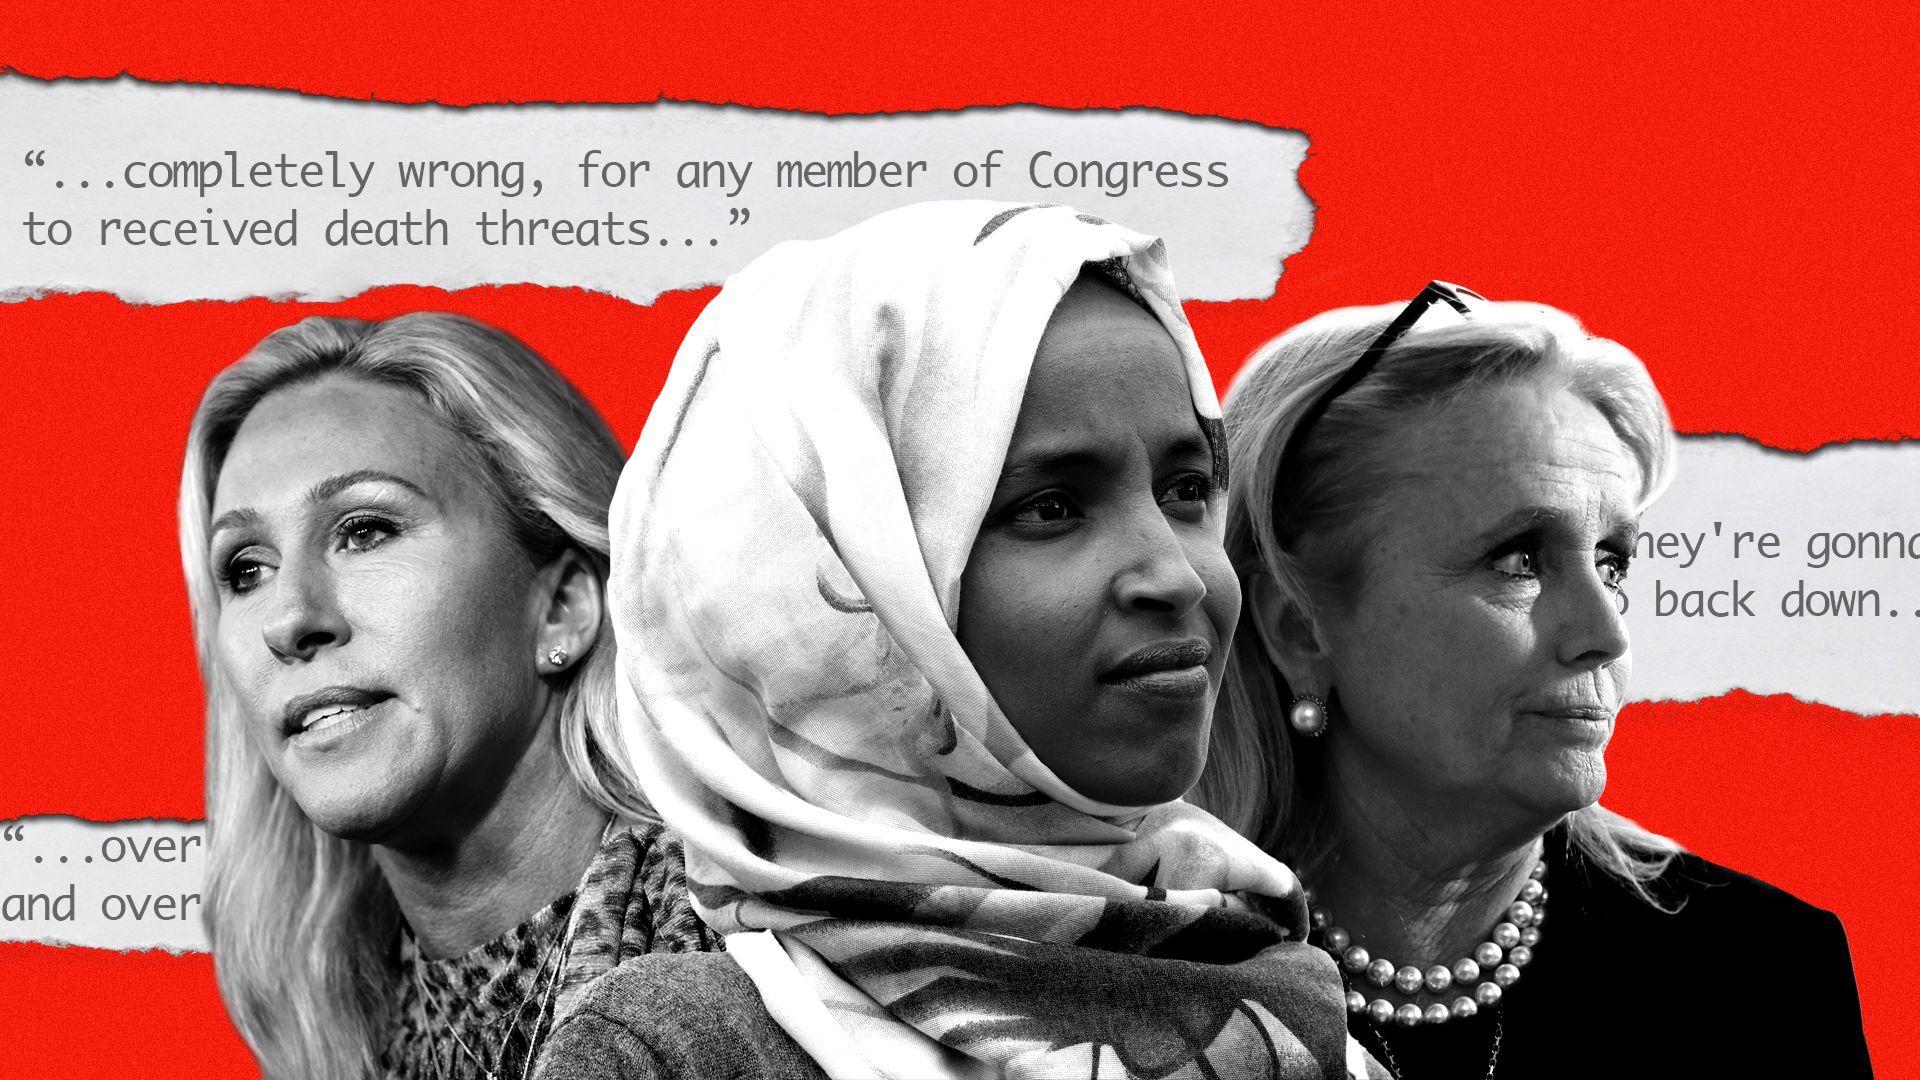 Photo illustration of Rep. Marjorie Taylor Greene, Rep. Ilhan Omar, and Rep. Debbie Dingell with quotes behind them